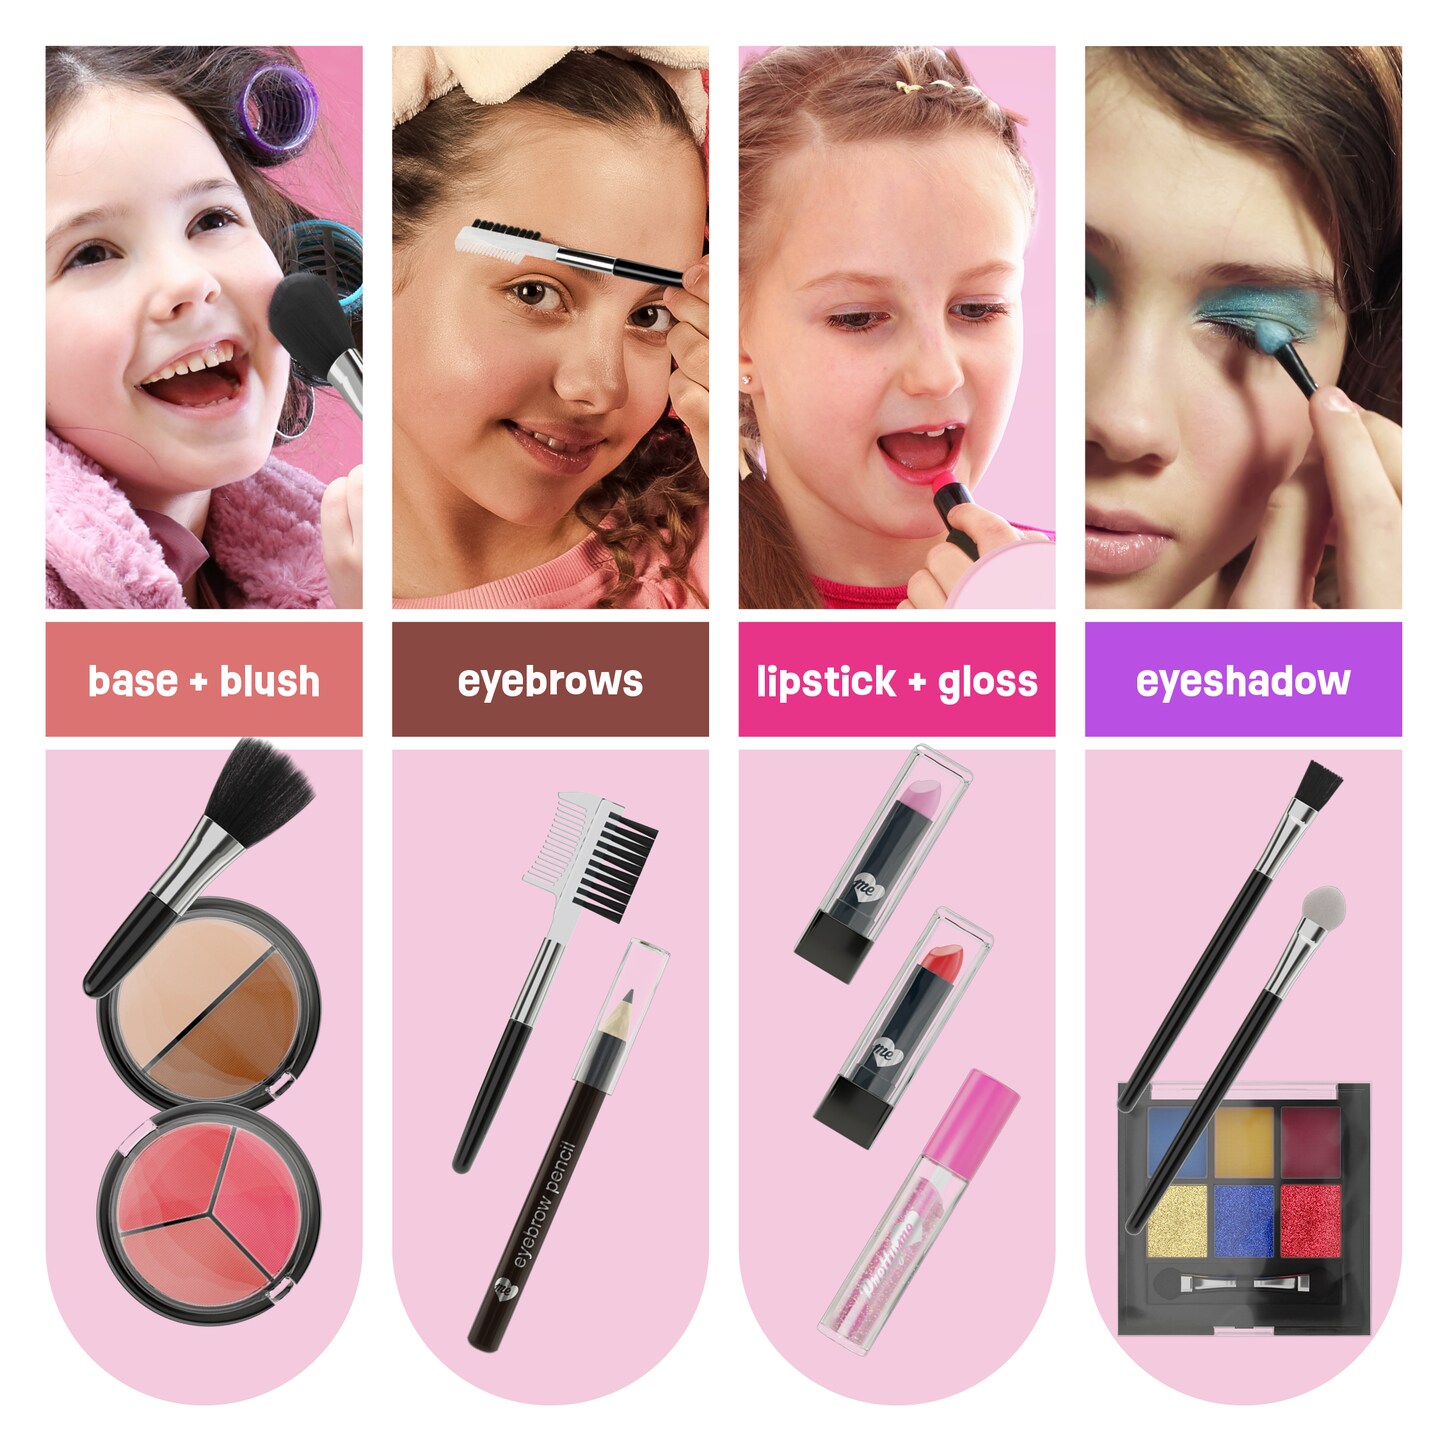 Makeup Set for Kids - Real Make Up Kit Safe for Little Girls Ages Years - Pretend Play Sets Toys for Toddler, Kid - Gifts Age 6, 7, 8 Year Old Girl, Toddlers - Birthday Toy Gift MKPSTD